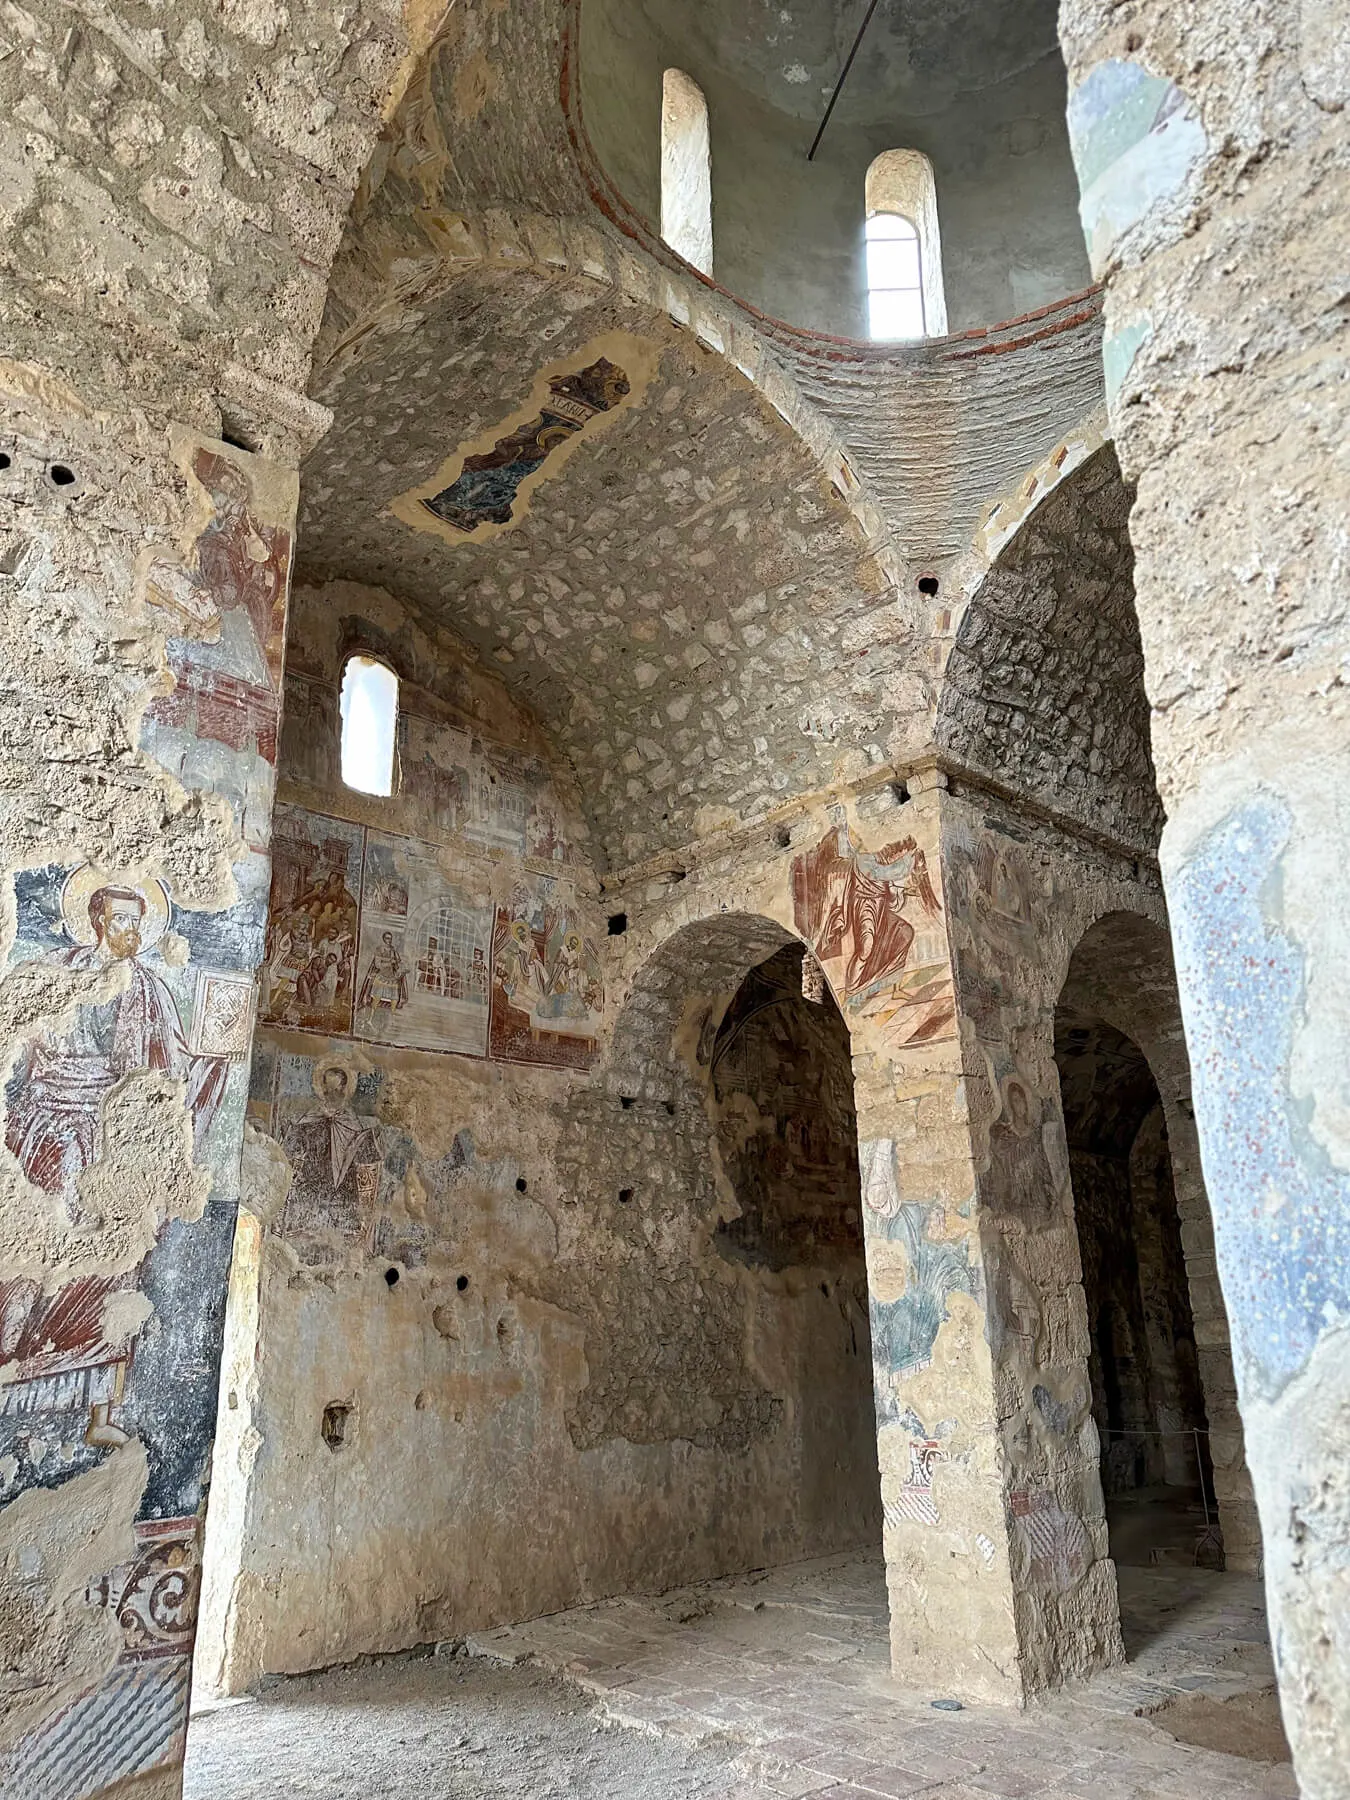 The inside of an Orthodox Church in Mystras with the remaining icons